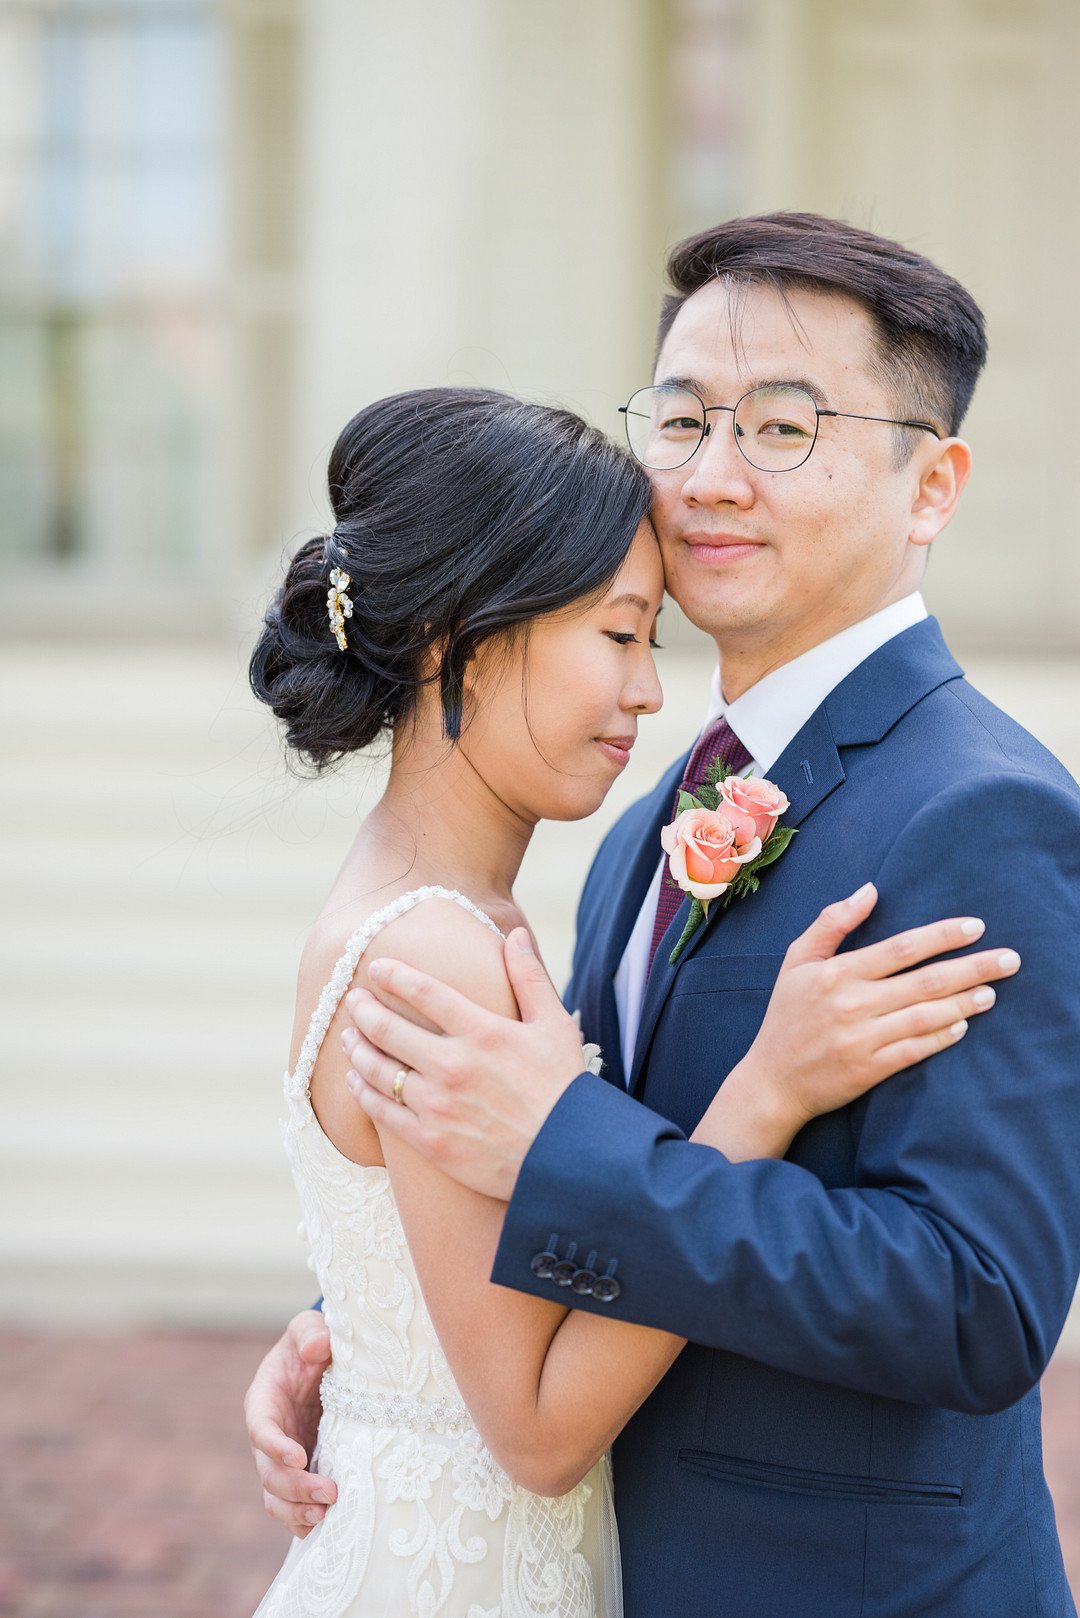 Chan_Chan_Winterlyn Photography_GLESSNER HOUSE CHICAGO WEDDING-88_low.jpg